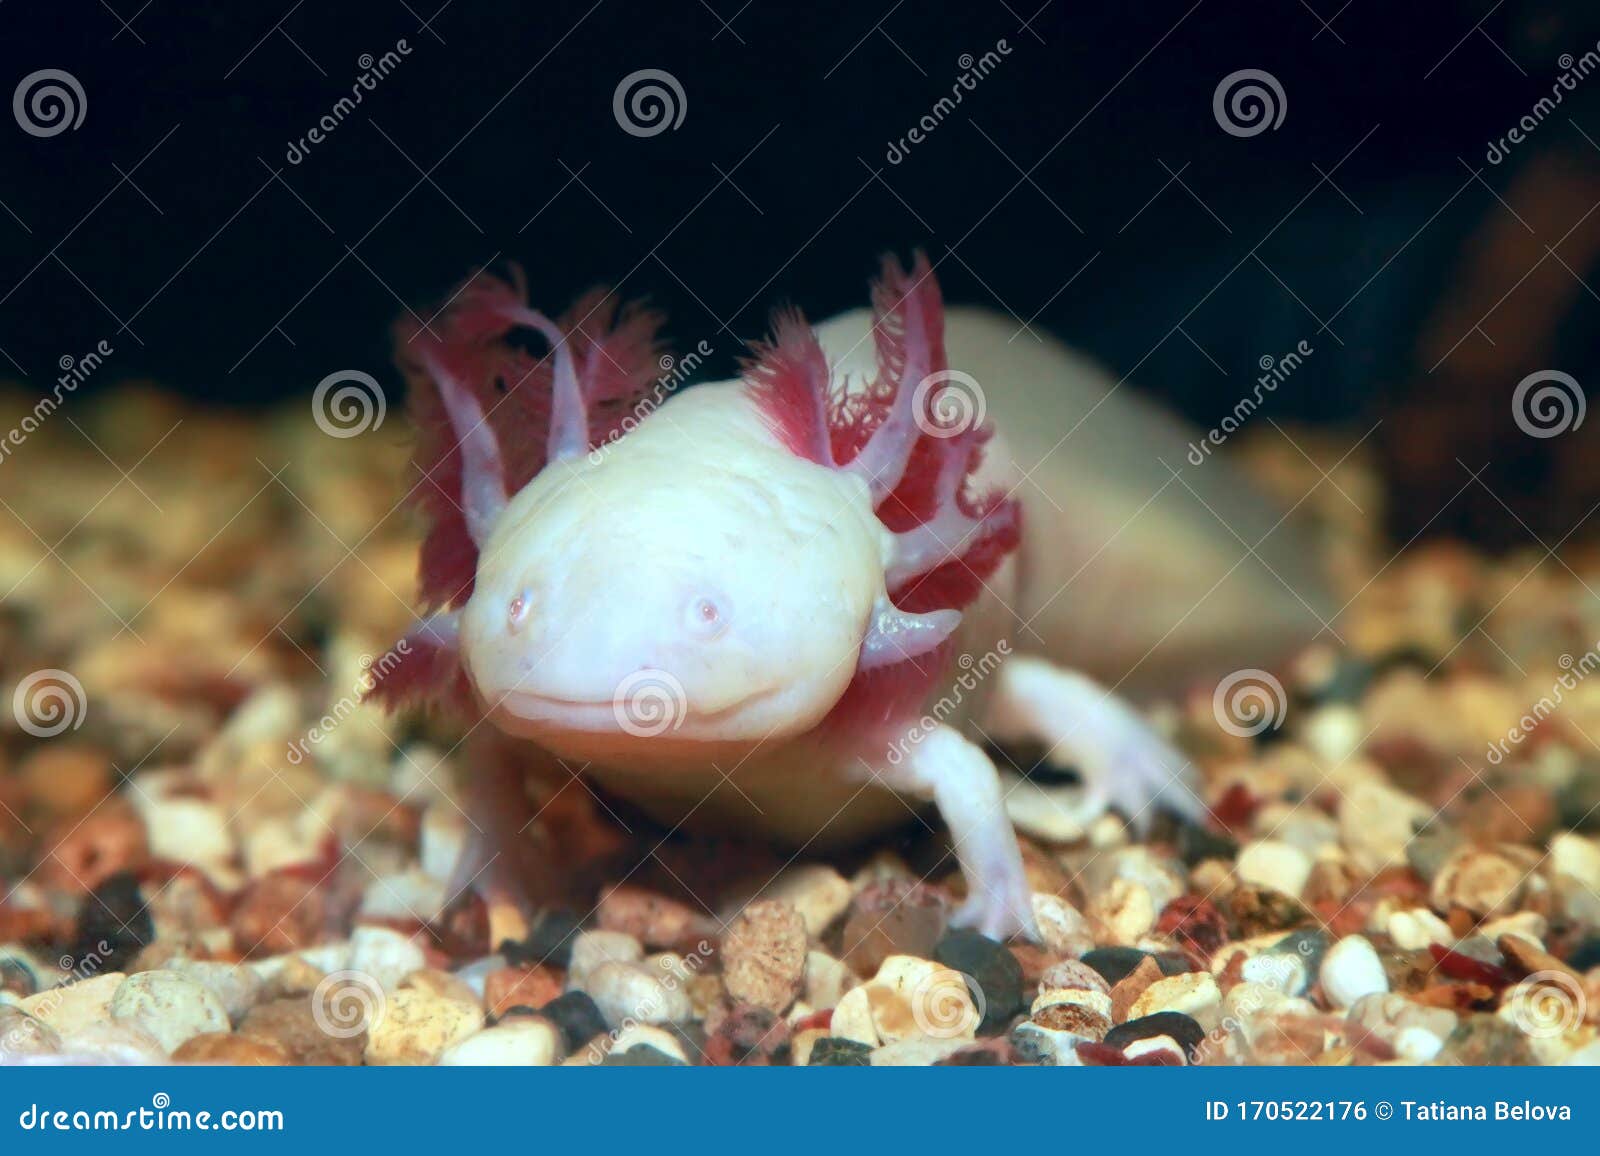 Mexican Walking Fish Photos Free Royalty Free Stock Photos From Dreamstime